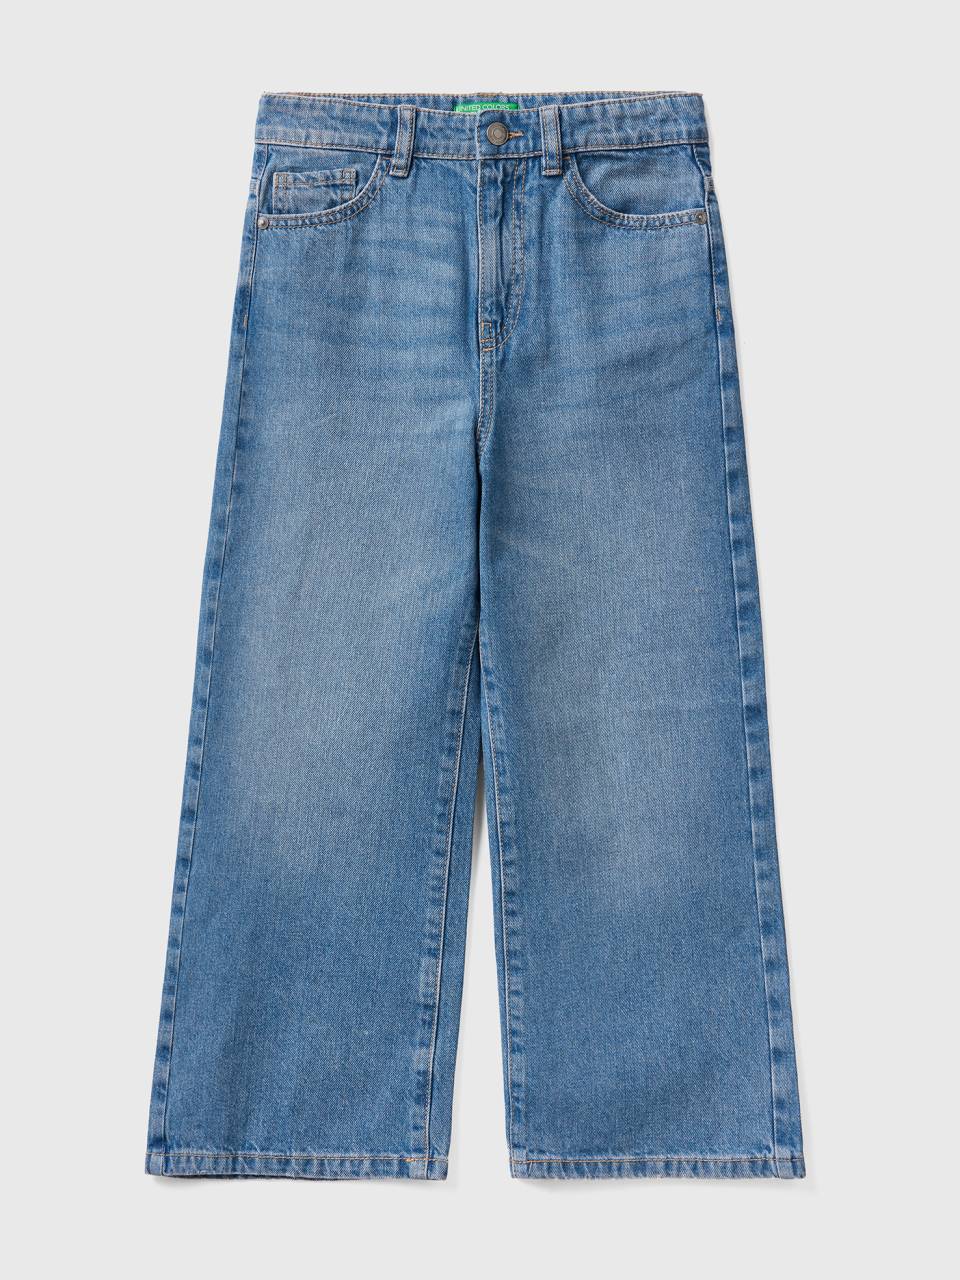 Benetton wide fit high-waisted jeans. 1